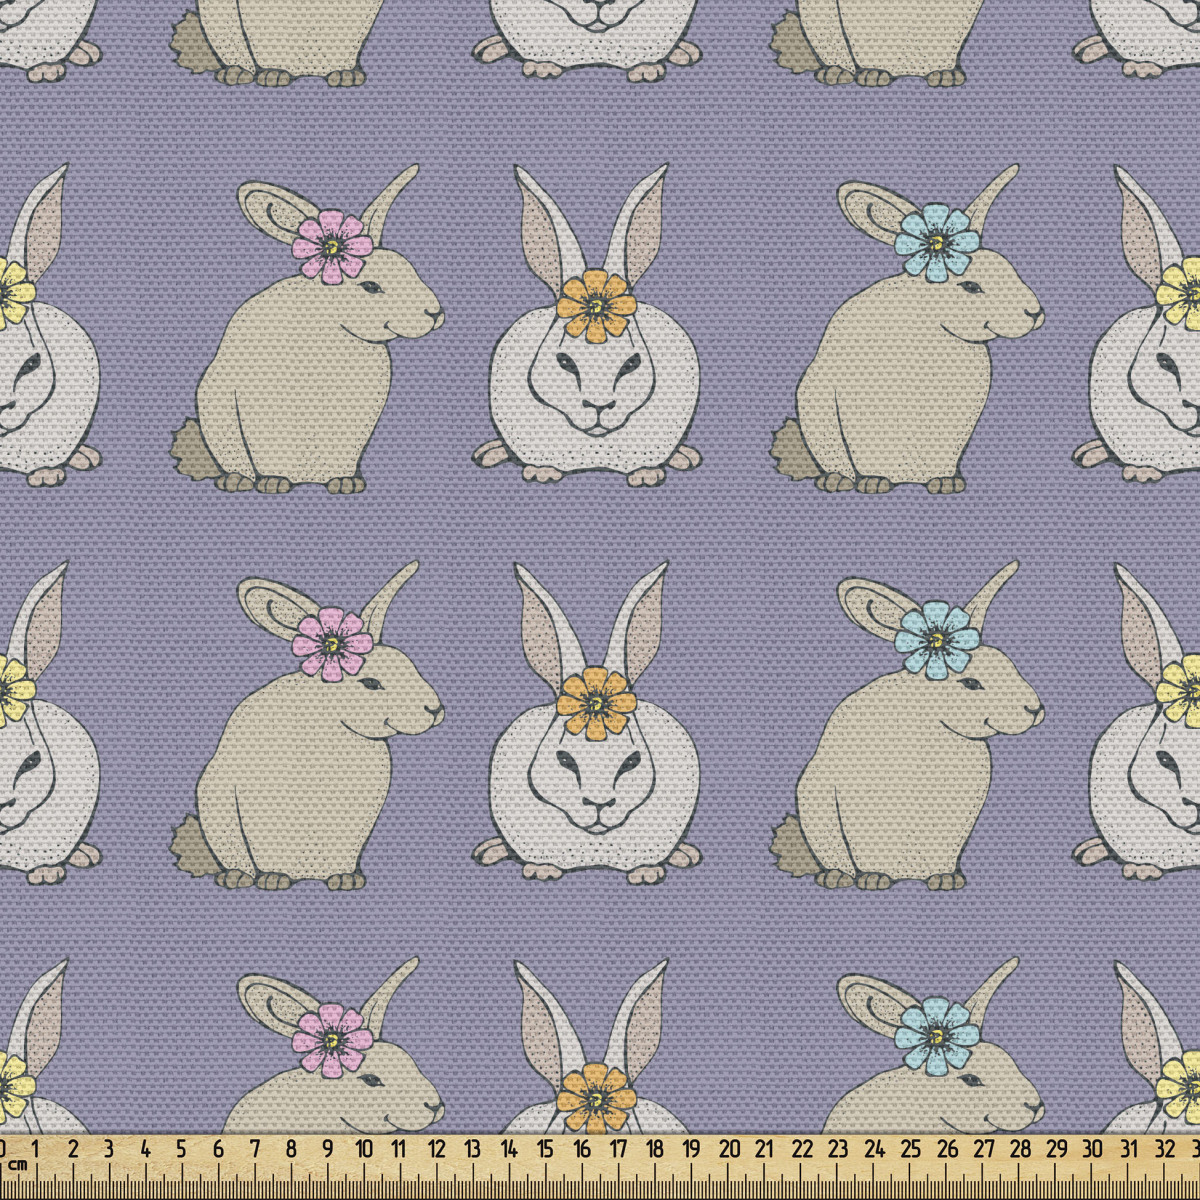 Peter rabbit fabric by the yard